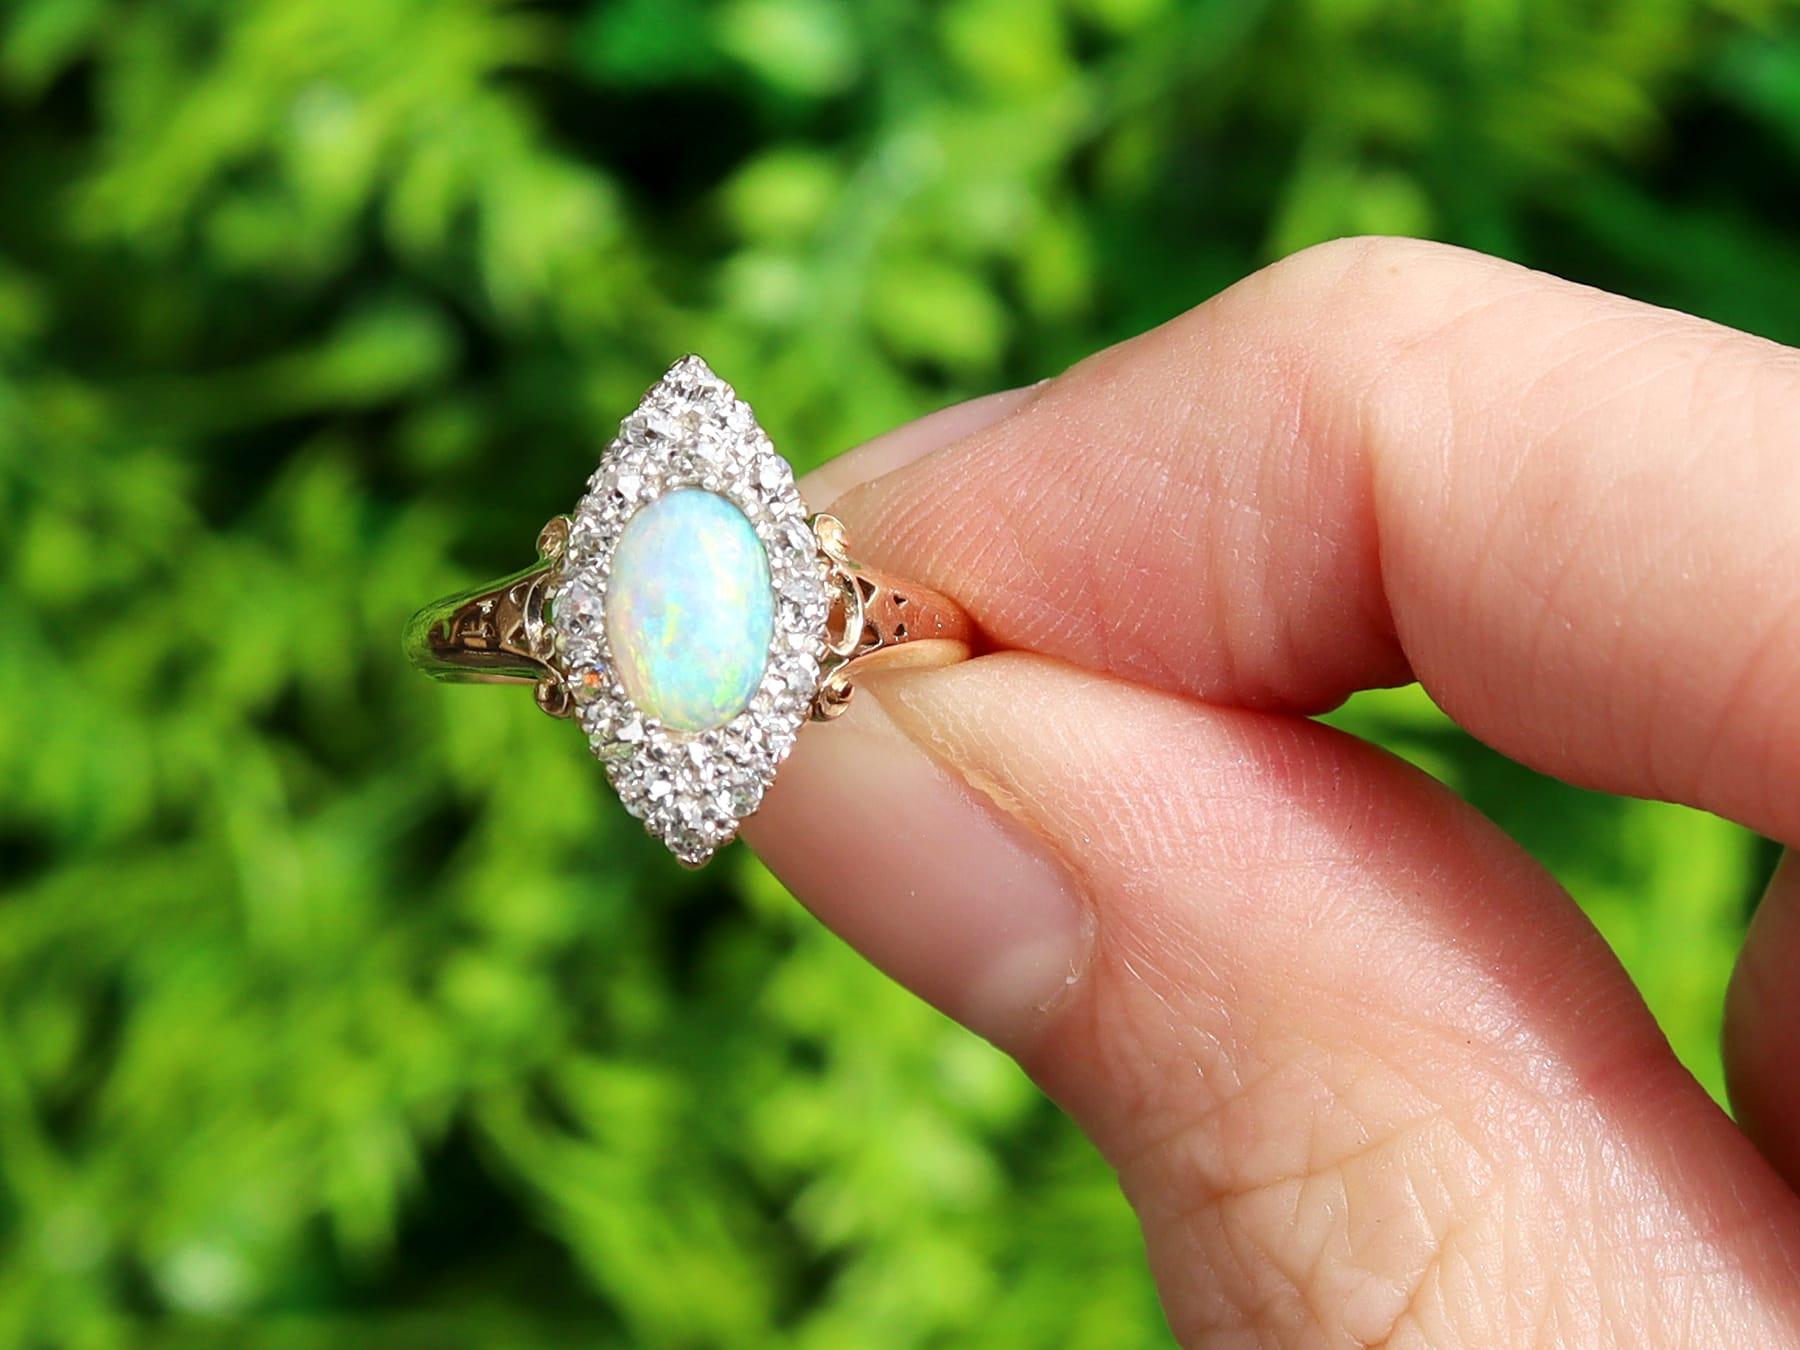 A fine and impressive antique 0.50 carat opal and 0.33 carat diamond, 18 karat yellow gold dress ring; part of our diverse collection of Victorian jewellery

This fine and impressive antique opal ring has been crafted in 18k yellow gold with a